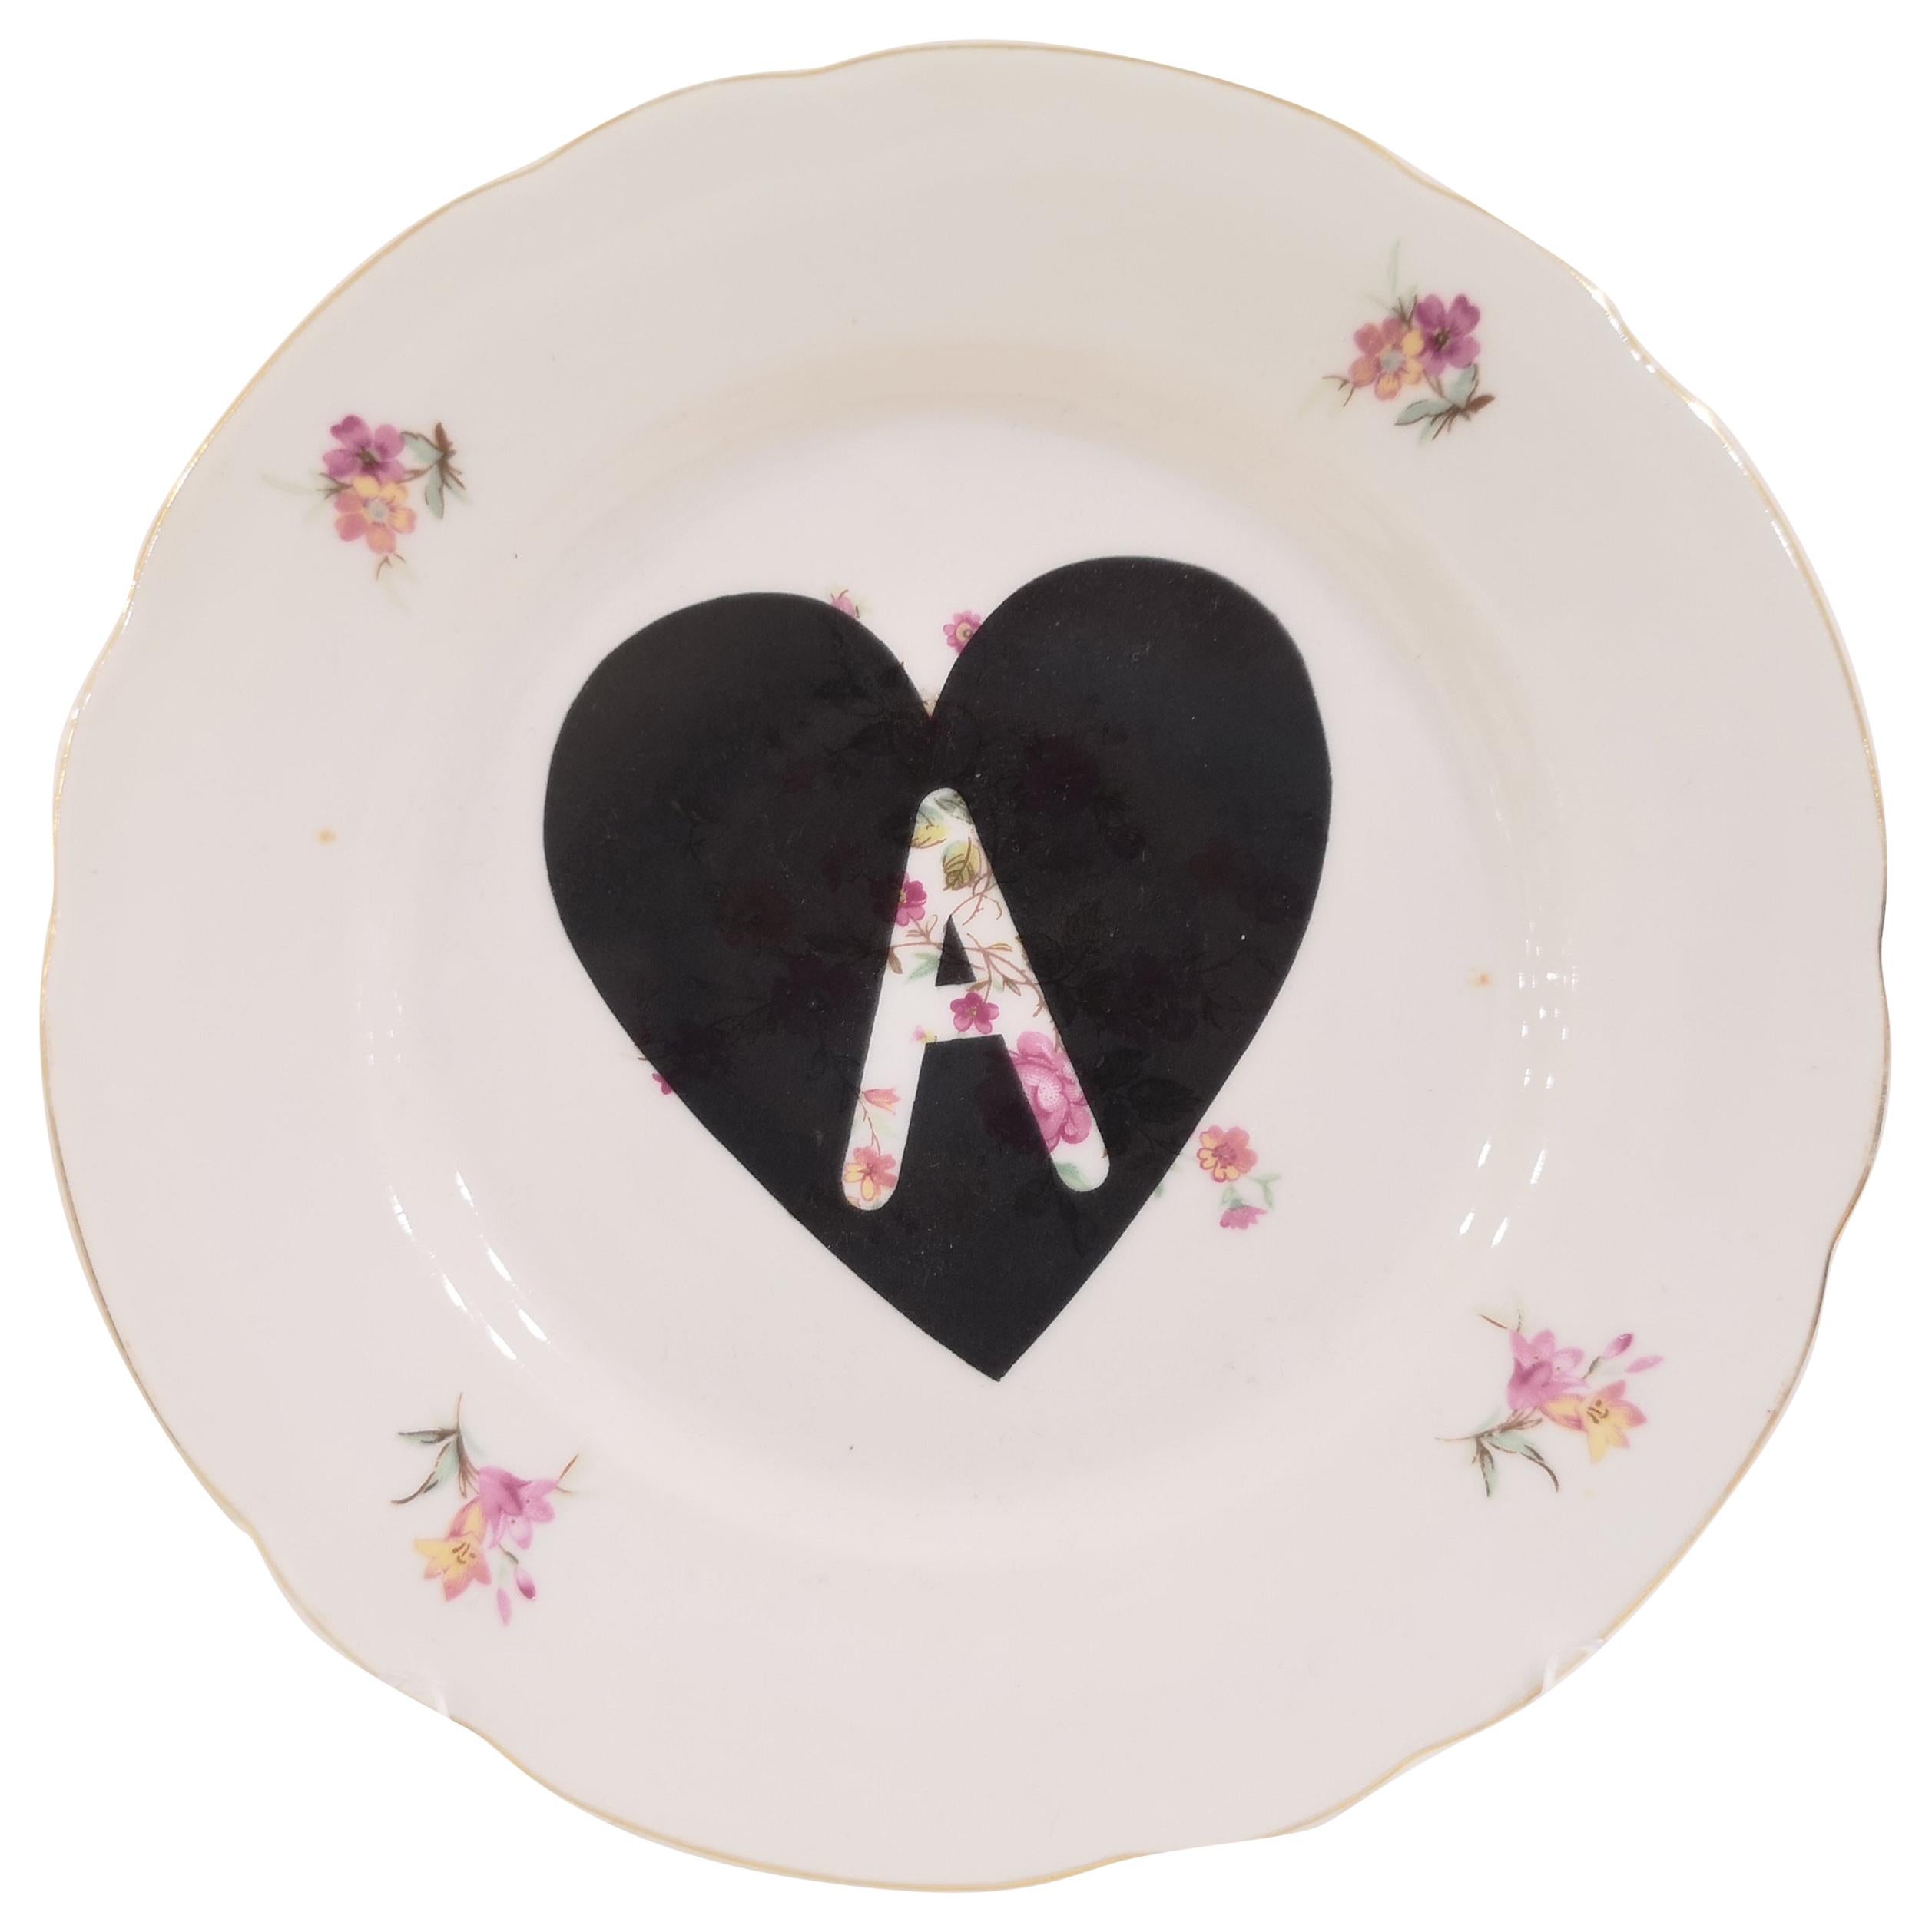 "A" plate dish